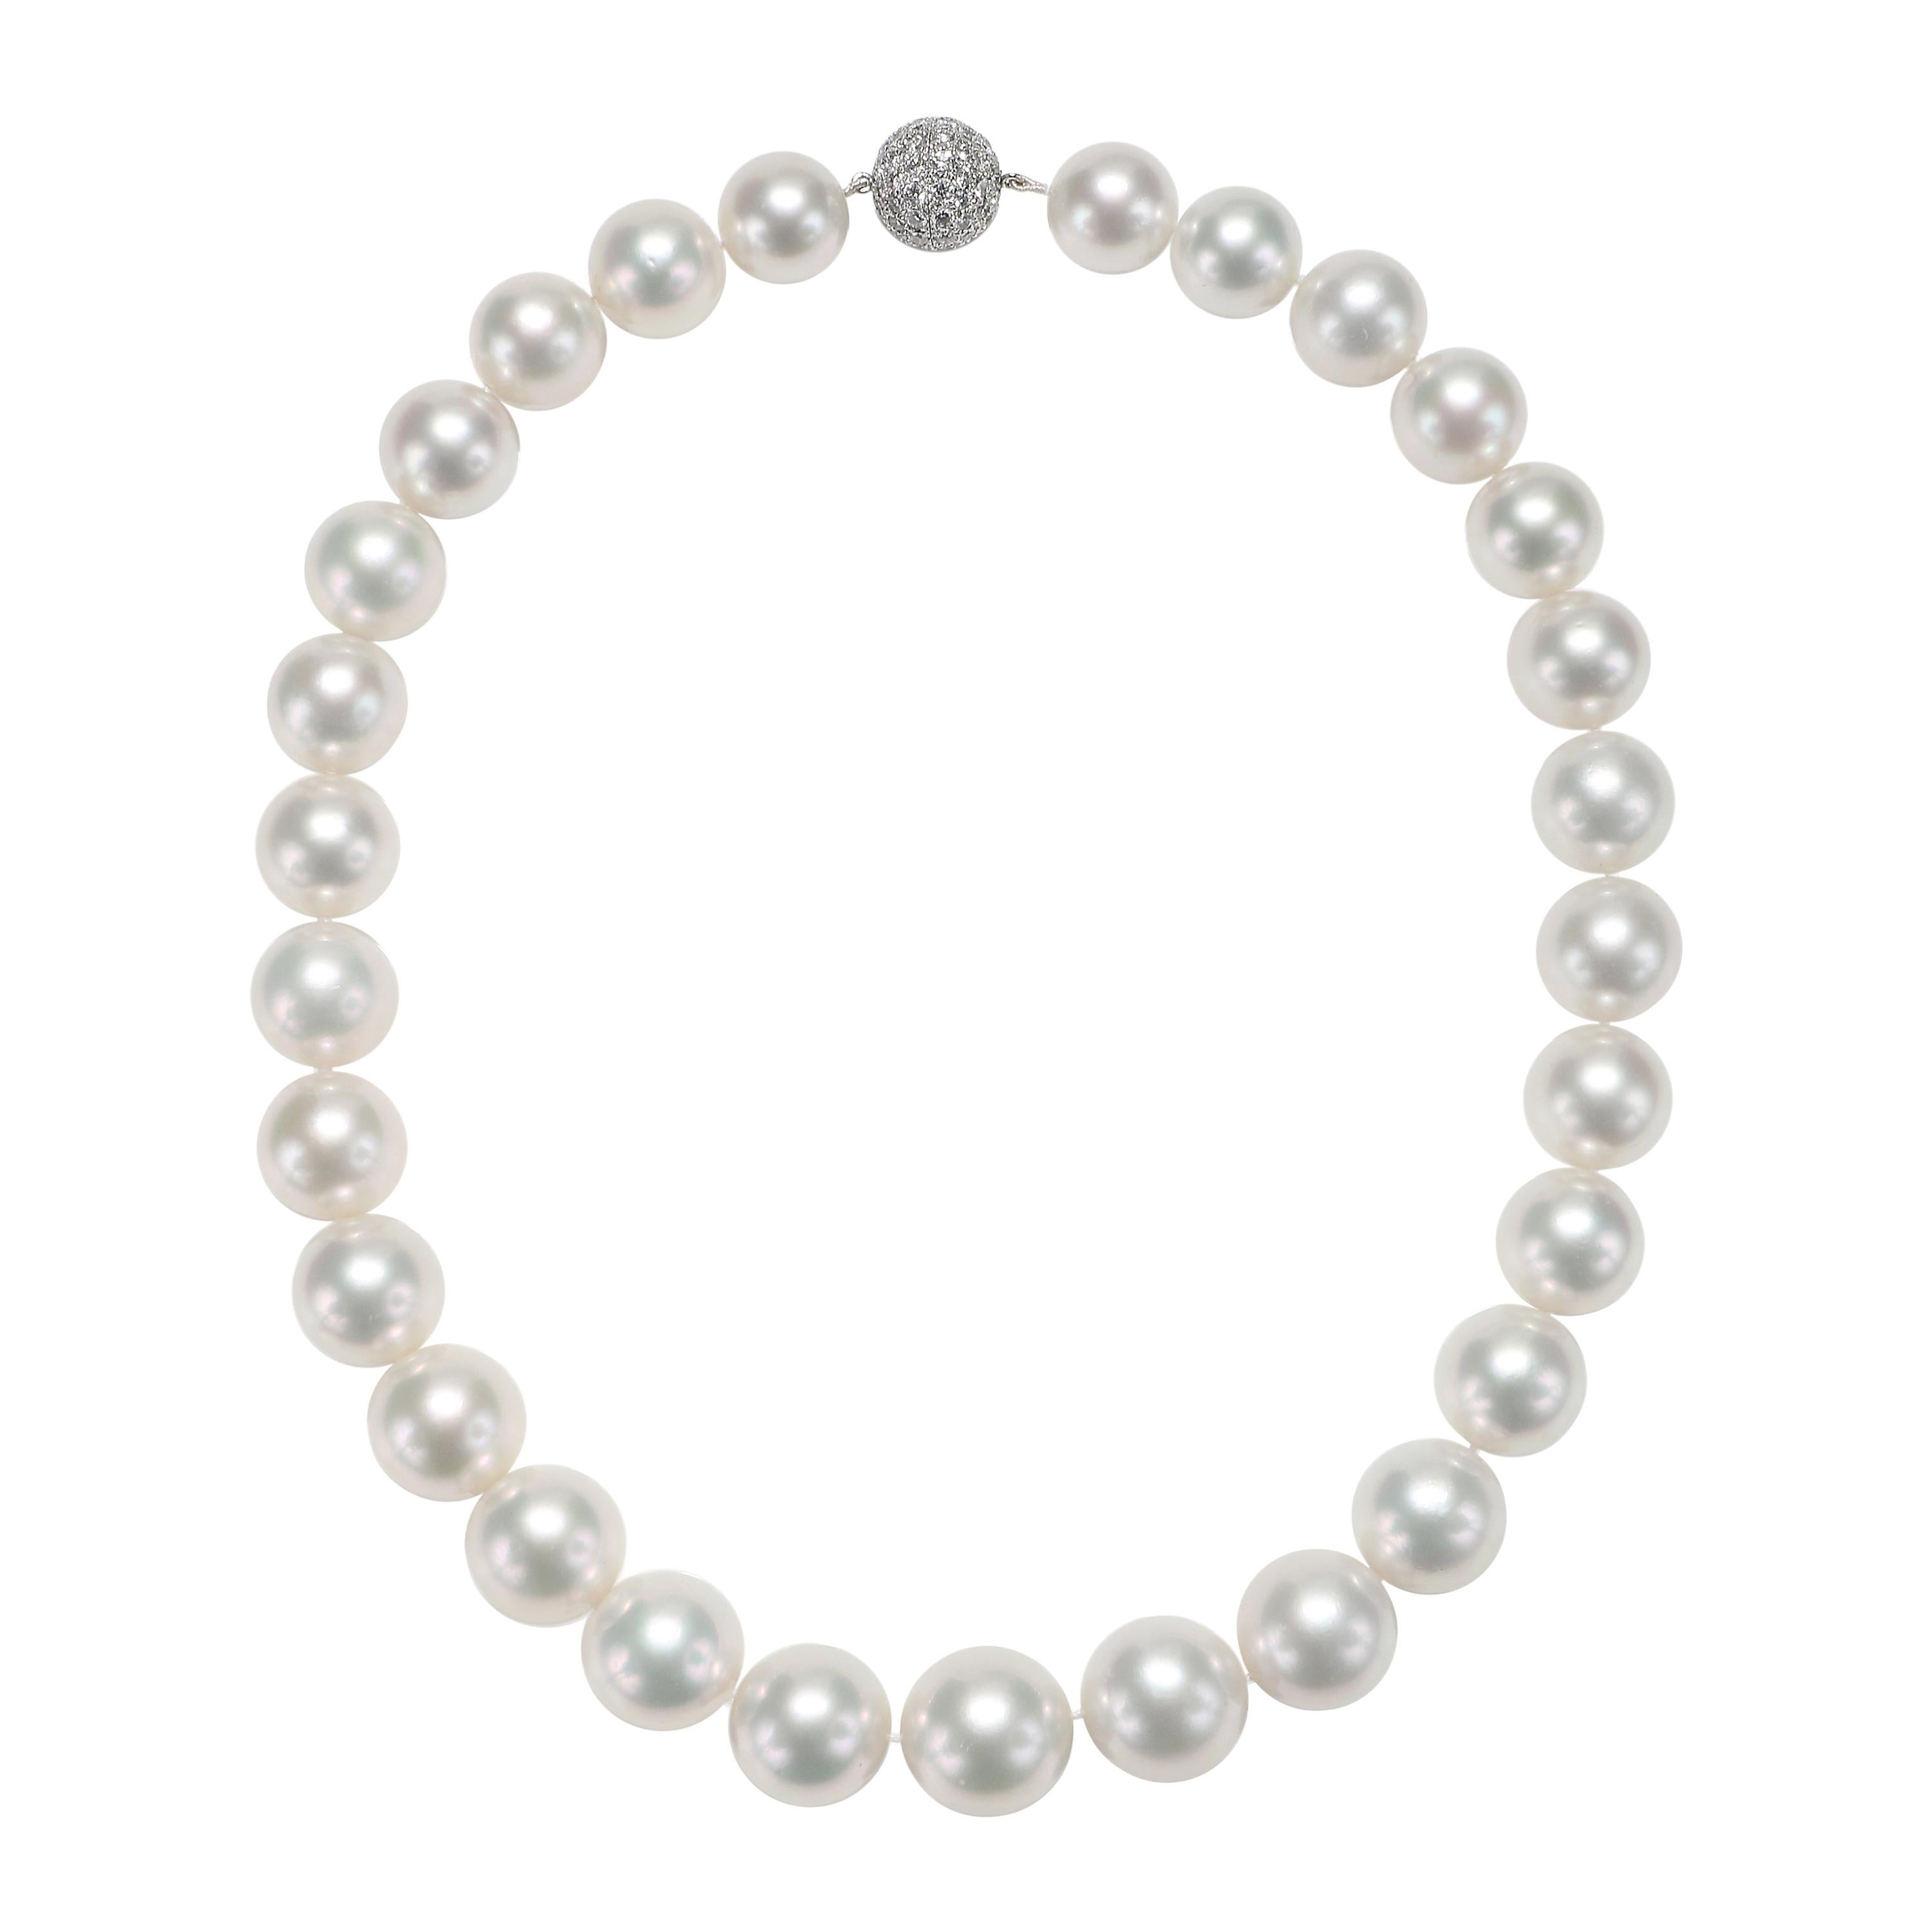 White South Sea Pearl Necklace with 18 Karat White Gold Diamond Pave Clasp For Sale